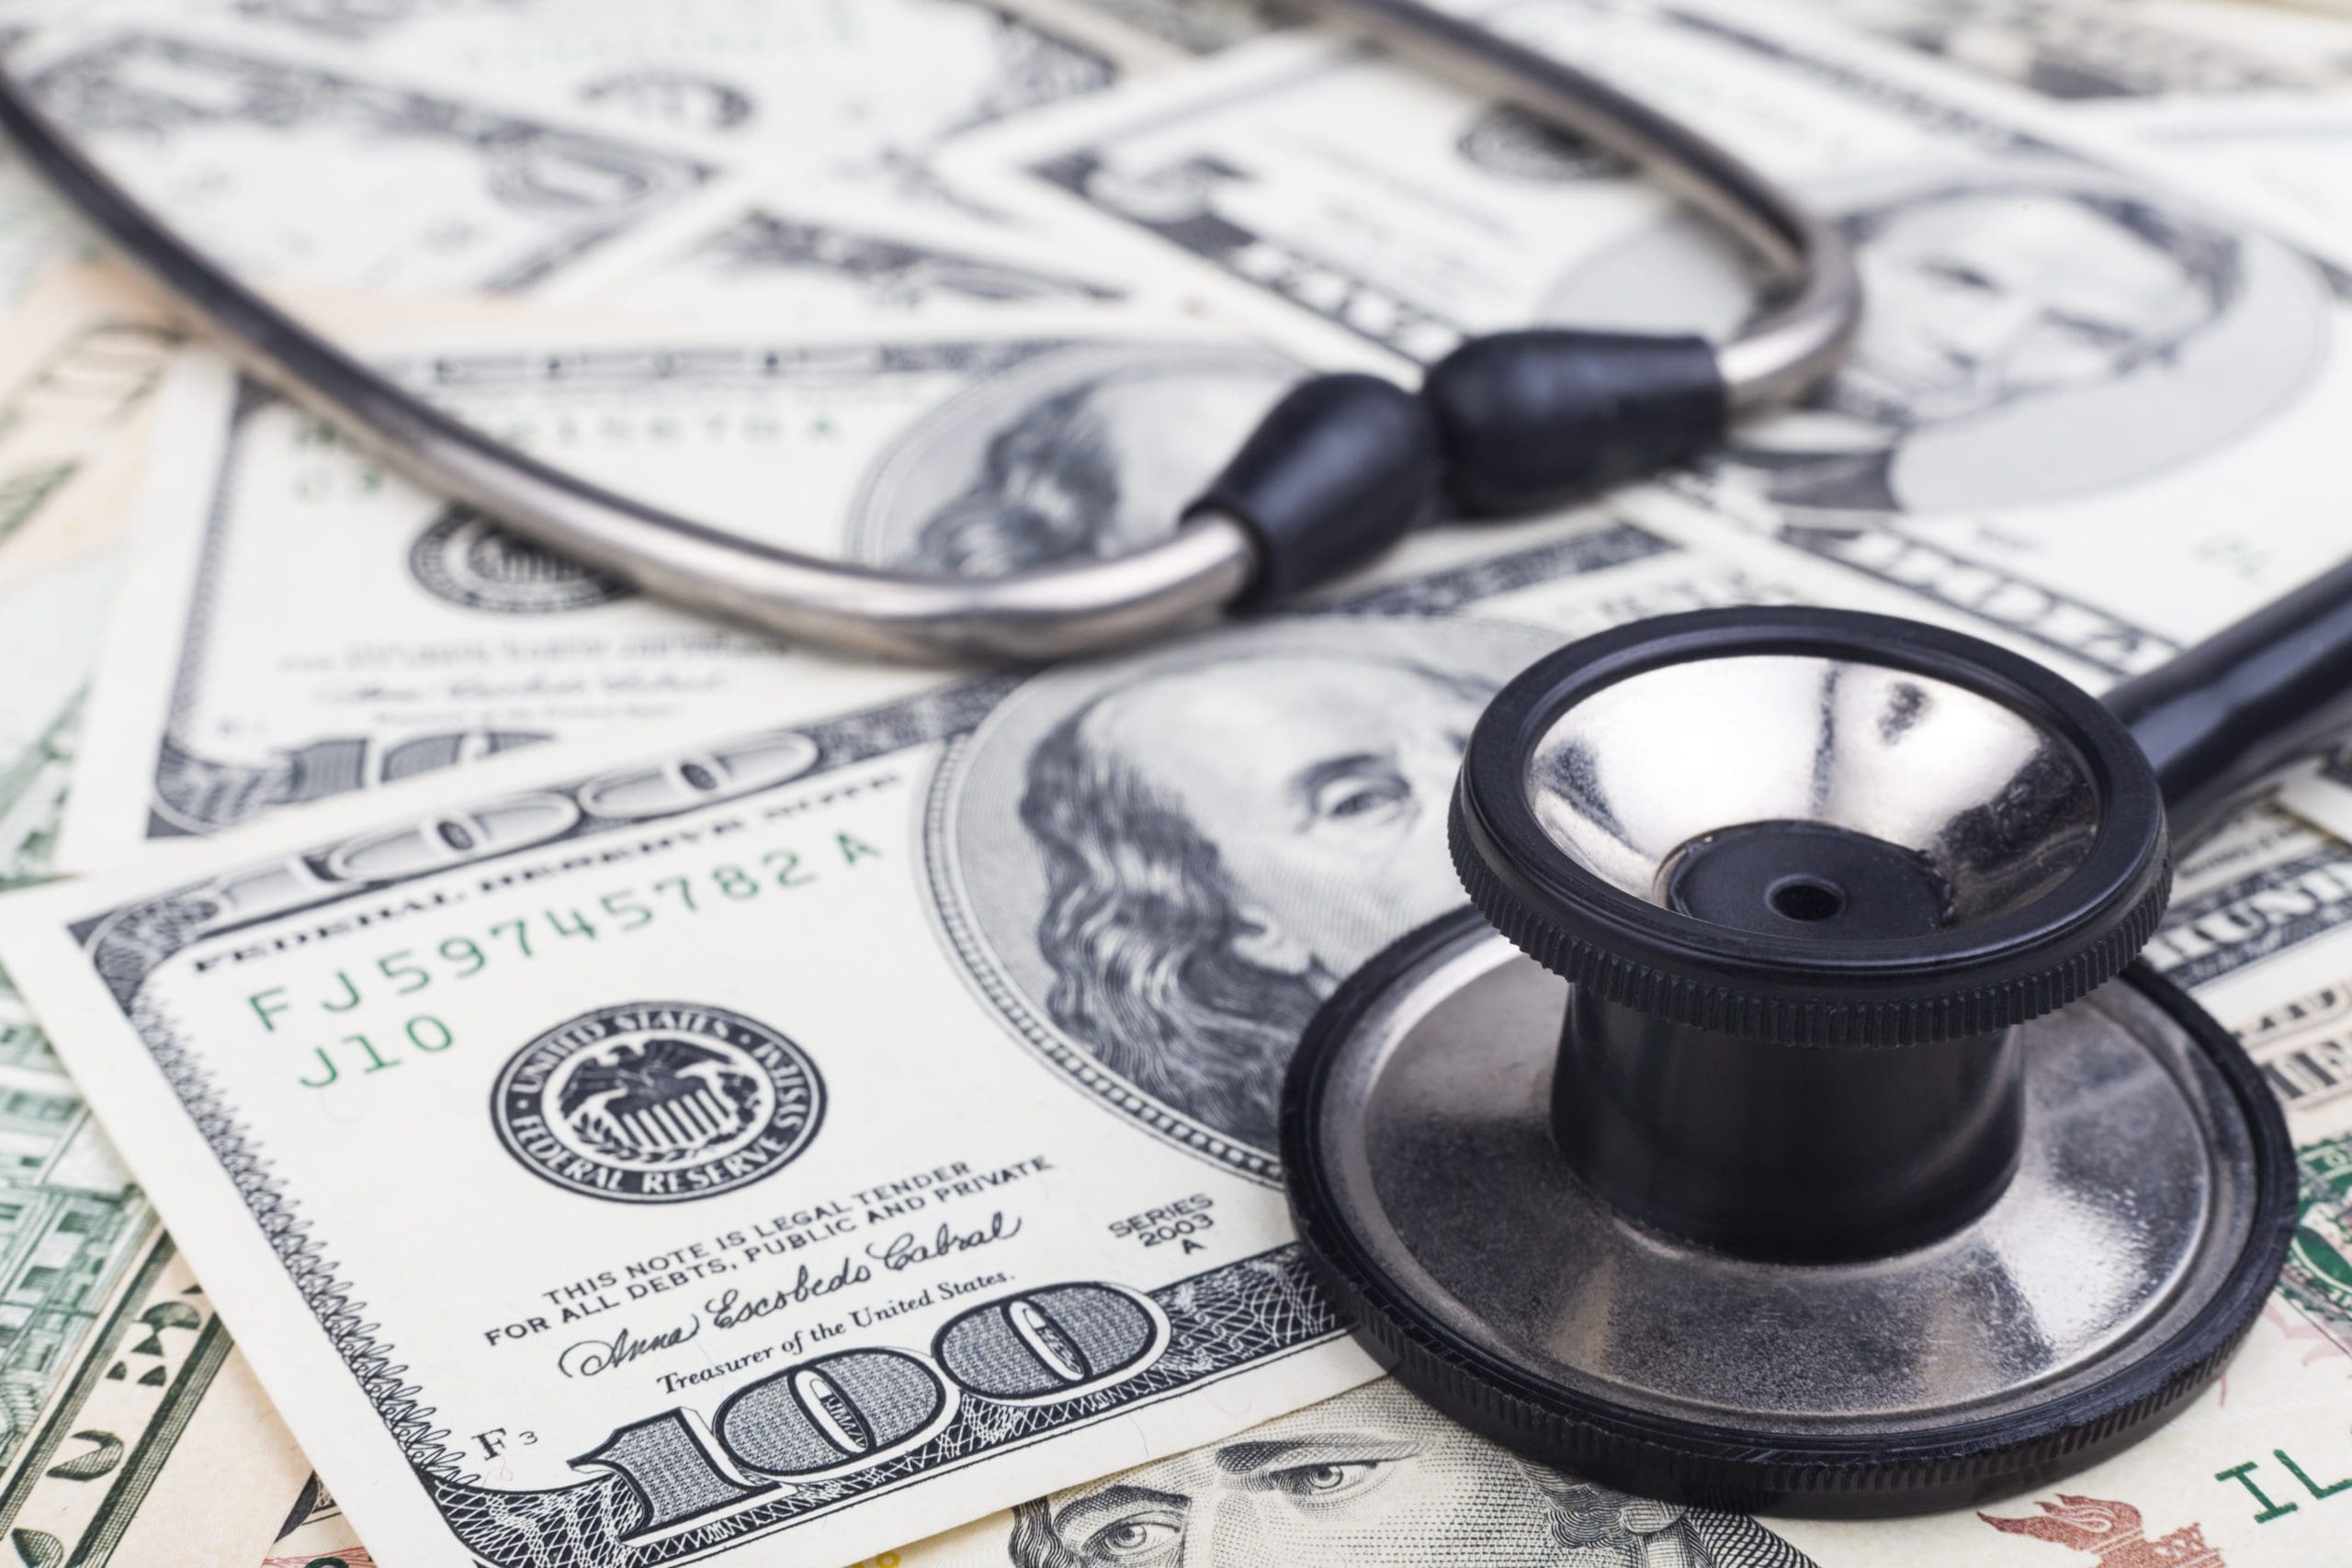 Black stethoscope close-up on top of Dollar banknotes side view